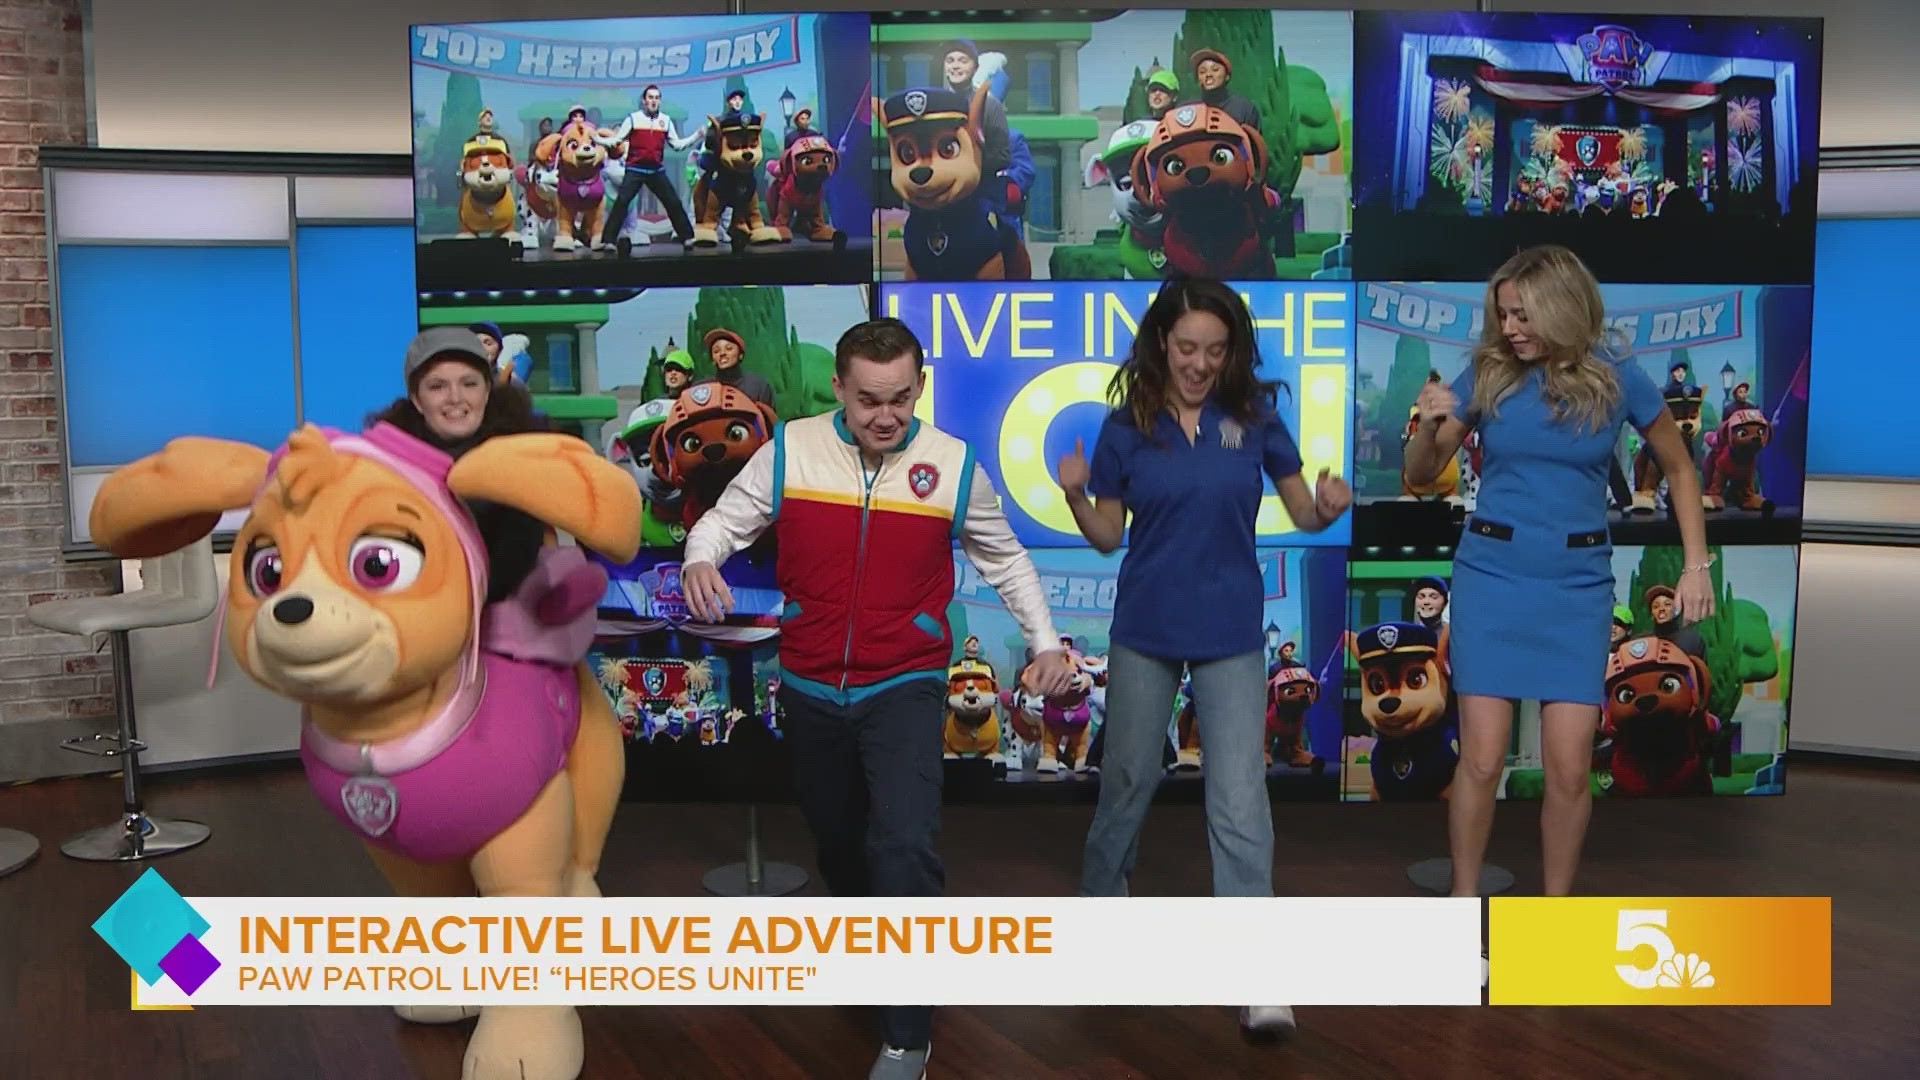 PAW Patrol Live! "Heroes Unite" will be at the Stifel Theatre this weekend. But first, some characters stop by our Show Me studio for a sneak peek!